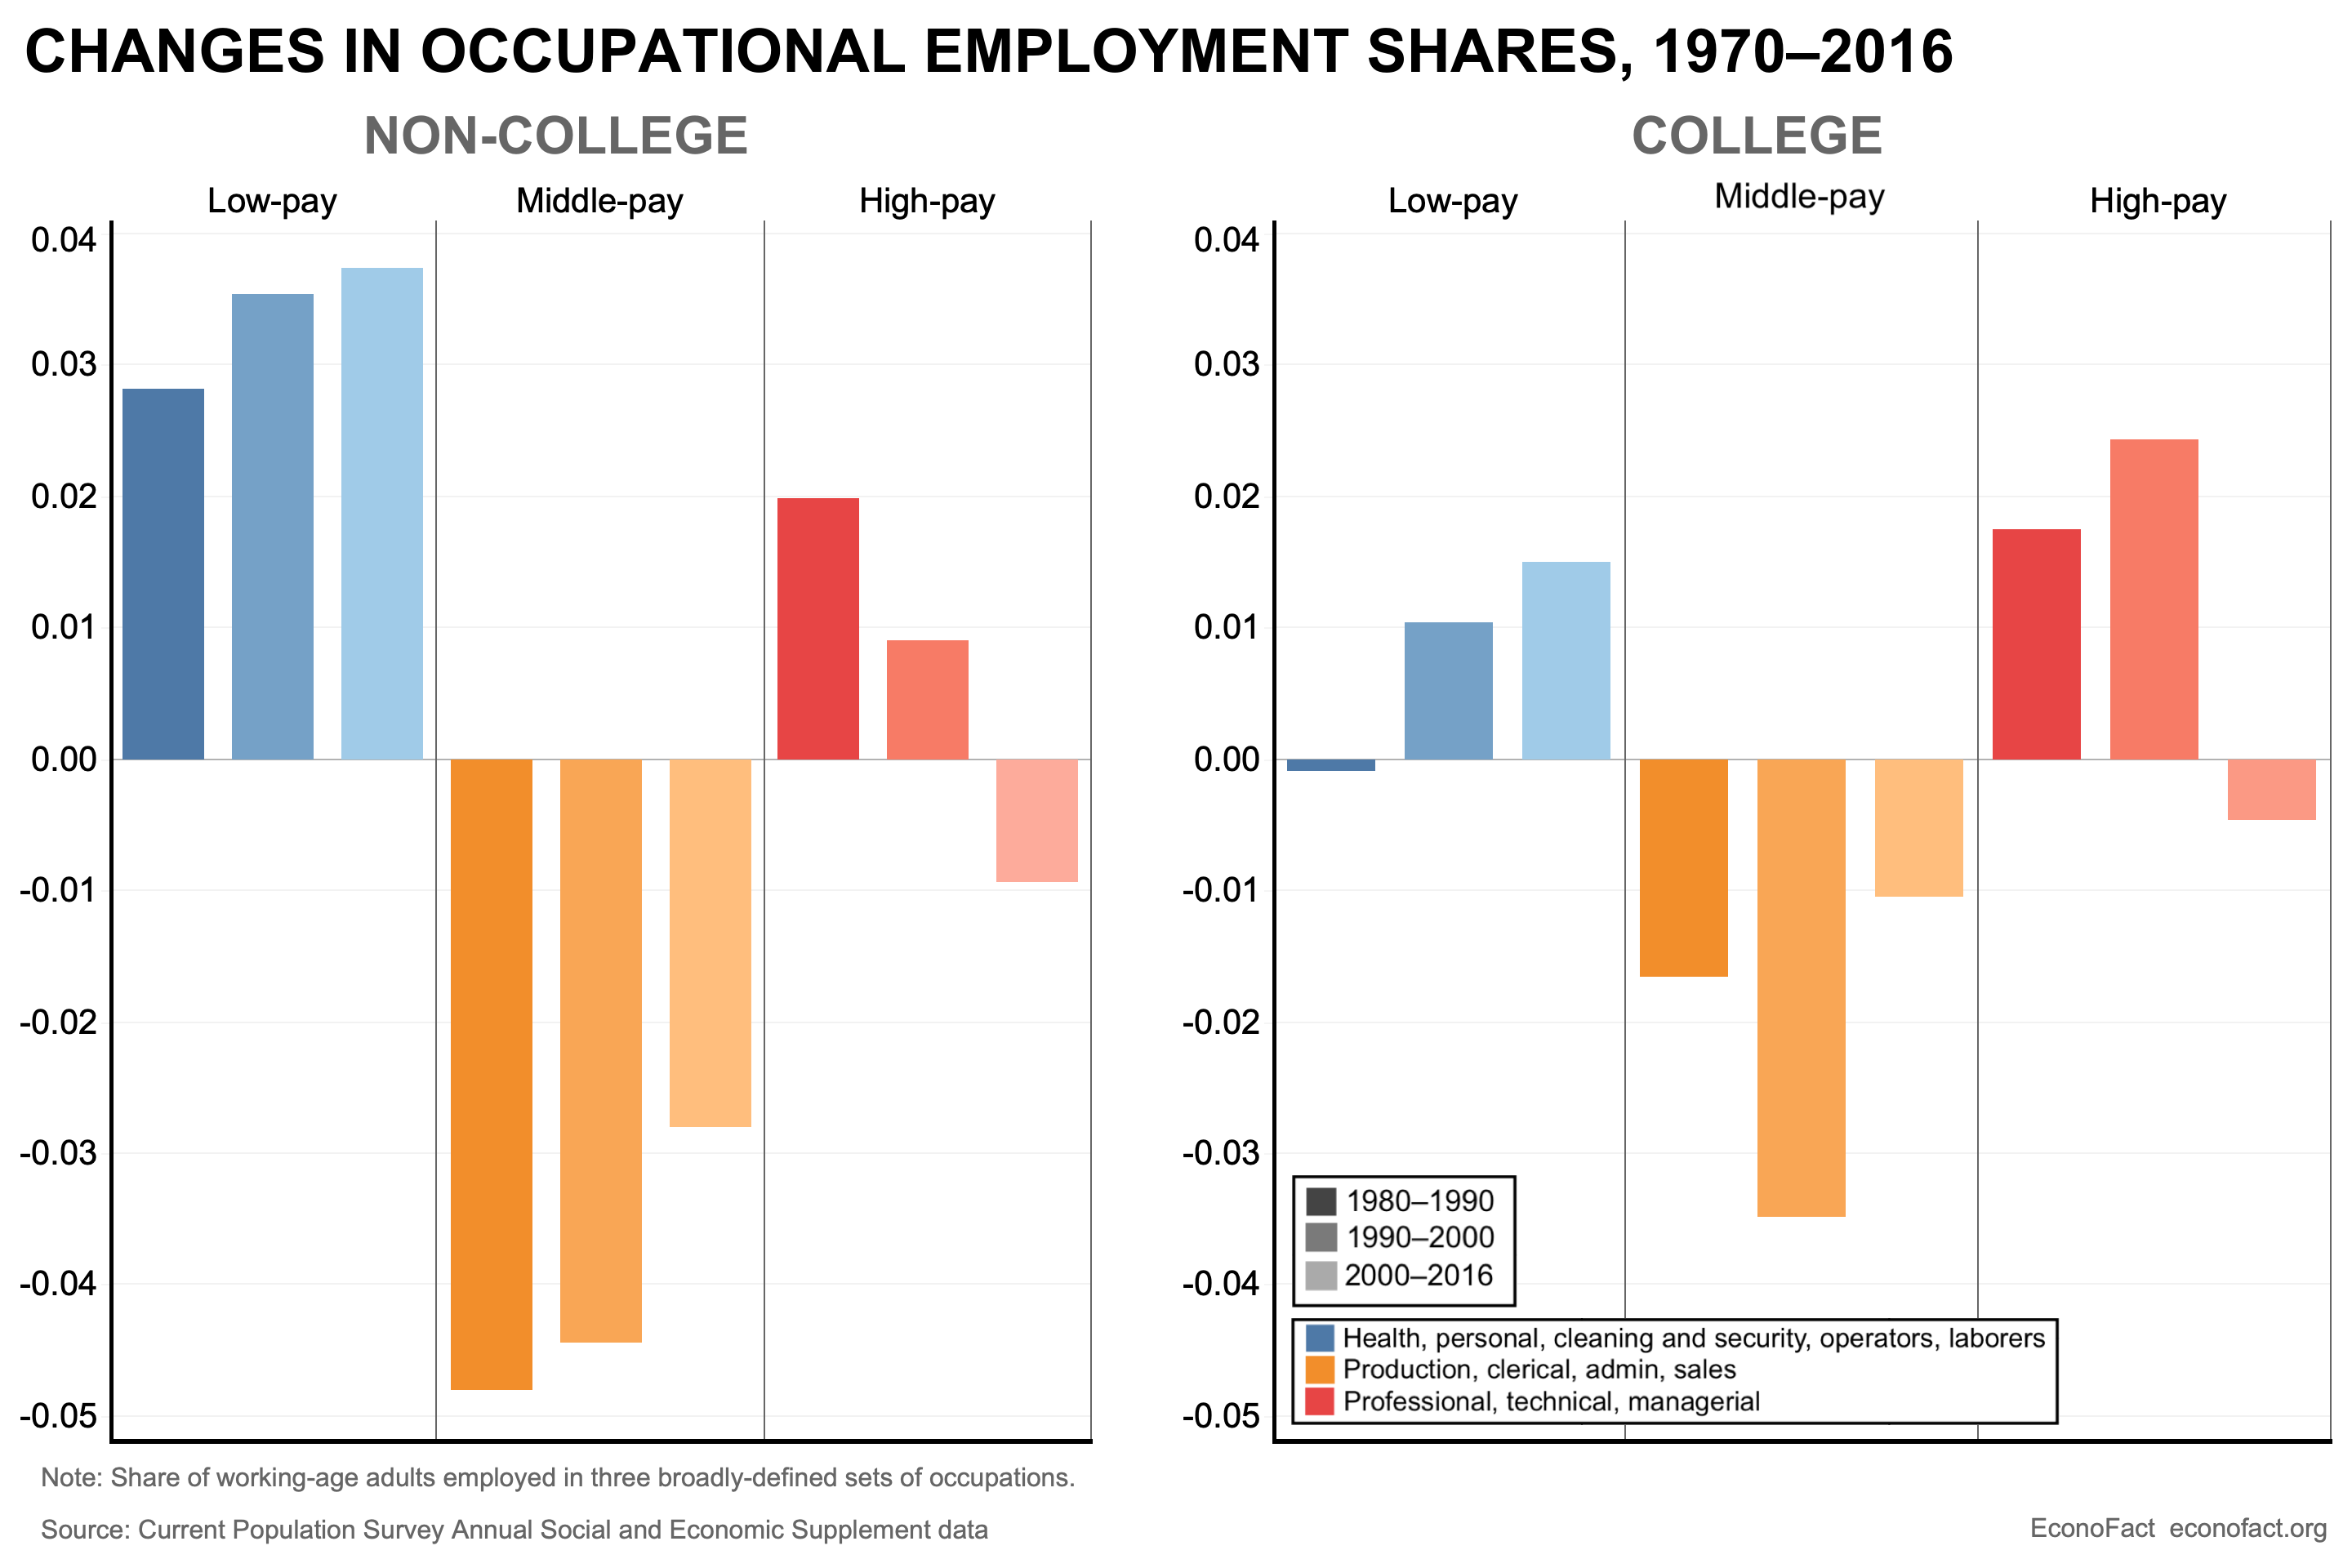 Changes in Occupational Employment Shares, 1970 to 2016. College-educated and non-college working-age adults are divided into low-, middle-, and high-paying jobs. The share of working-age adults in low-paying jobs has increased for both groups, while the she in high-paying jobs has decreased since 2000 for both groups.